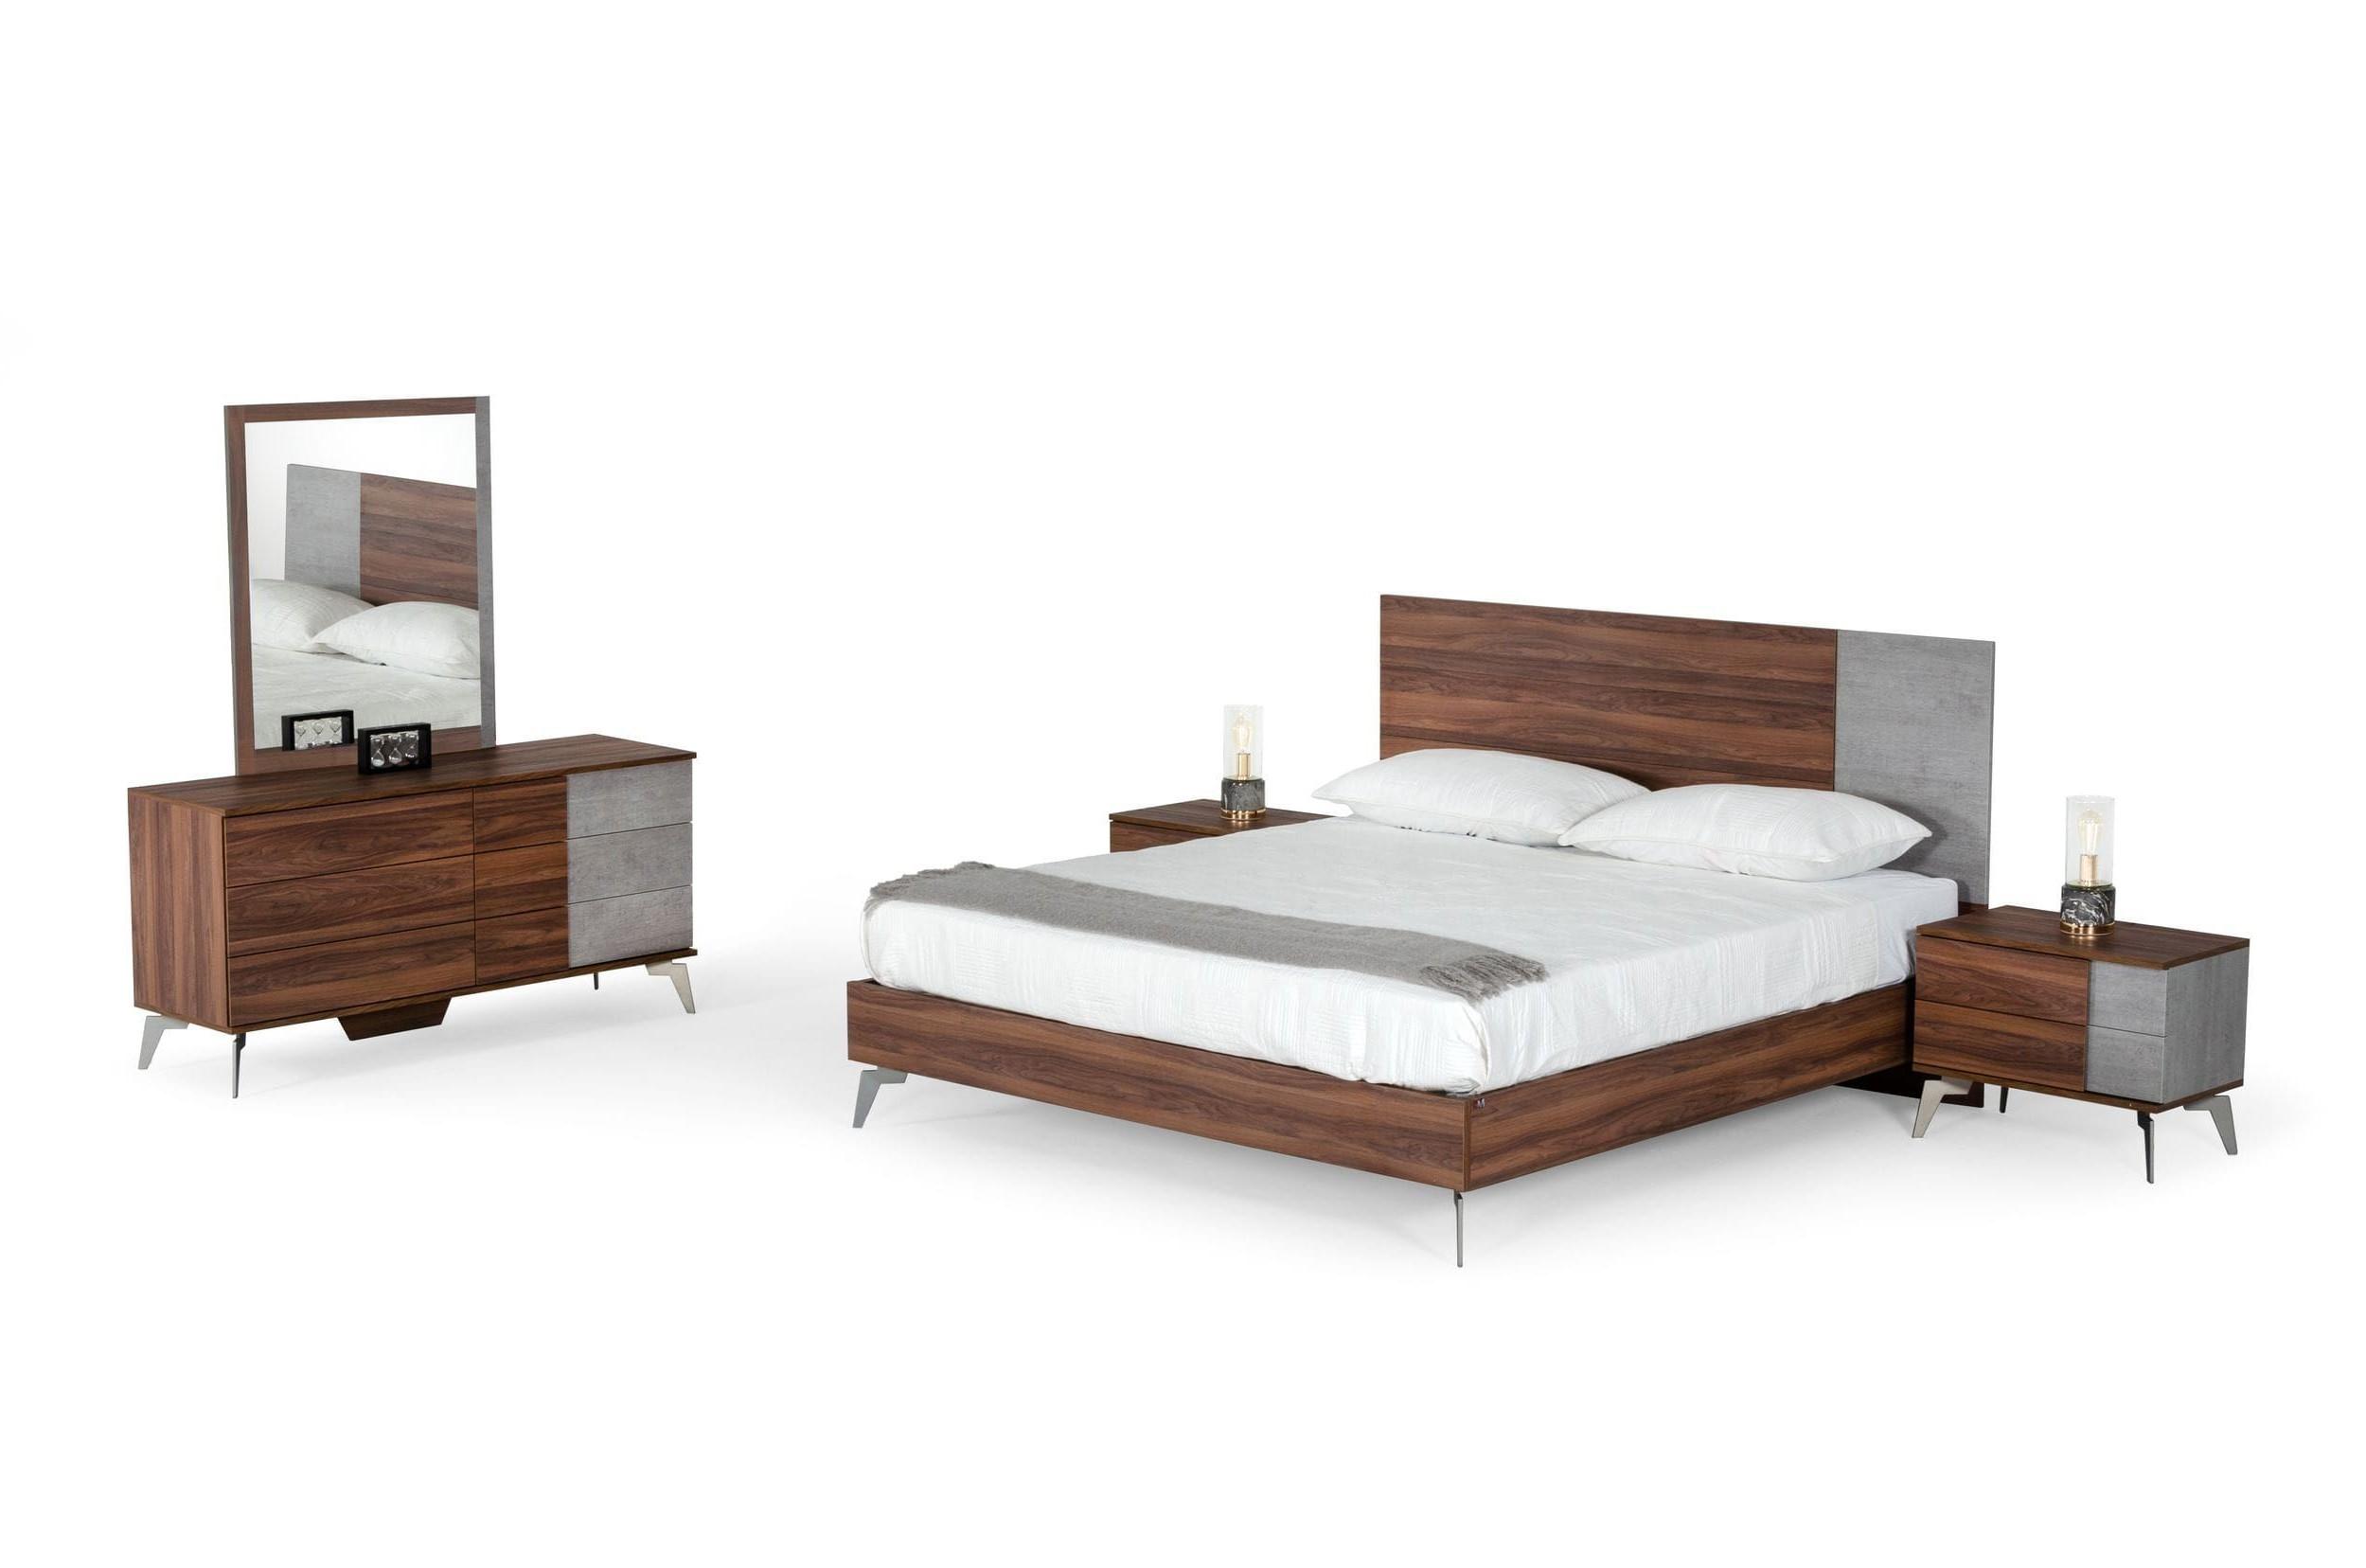 Contemporary, Modern Panel Bedroom Set Palermo VGACPALERMO-WAL-BED-K-5pcs in Walnut 